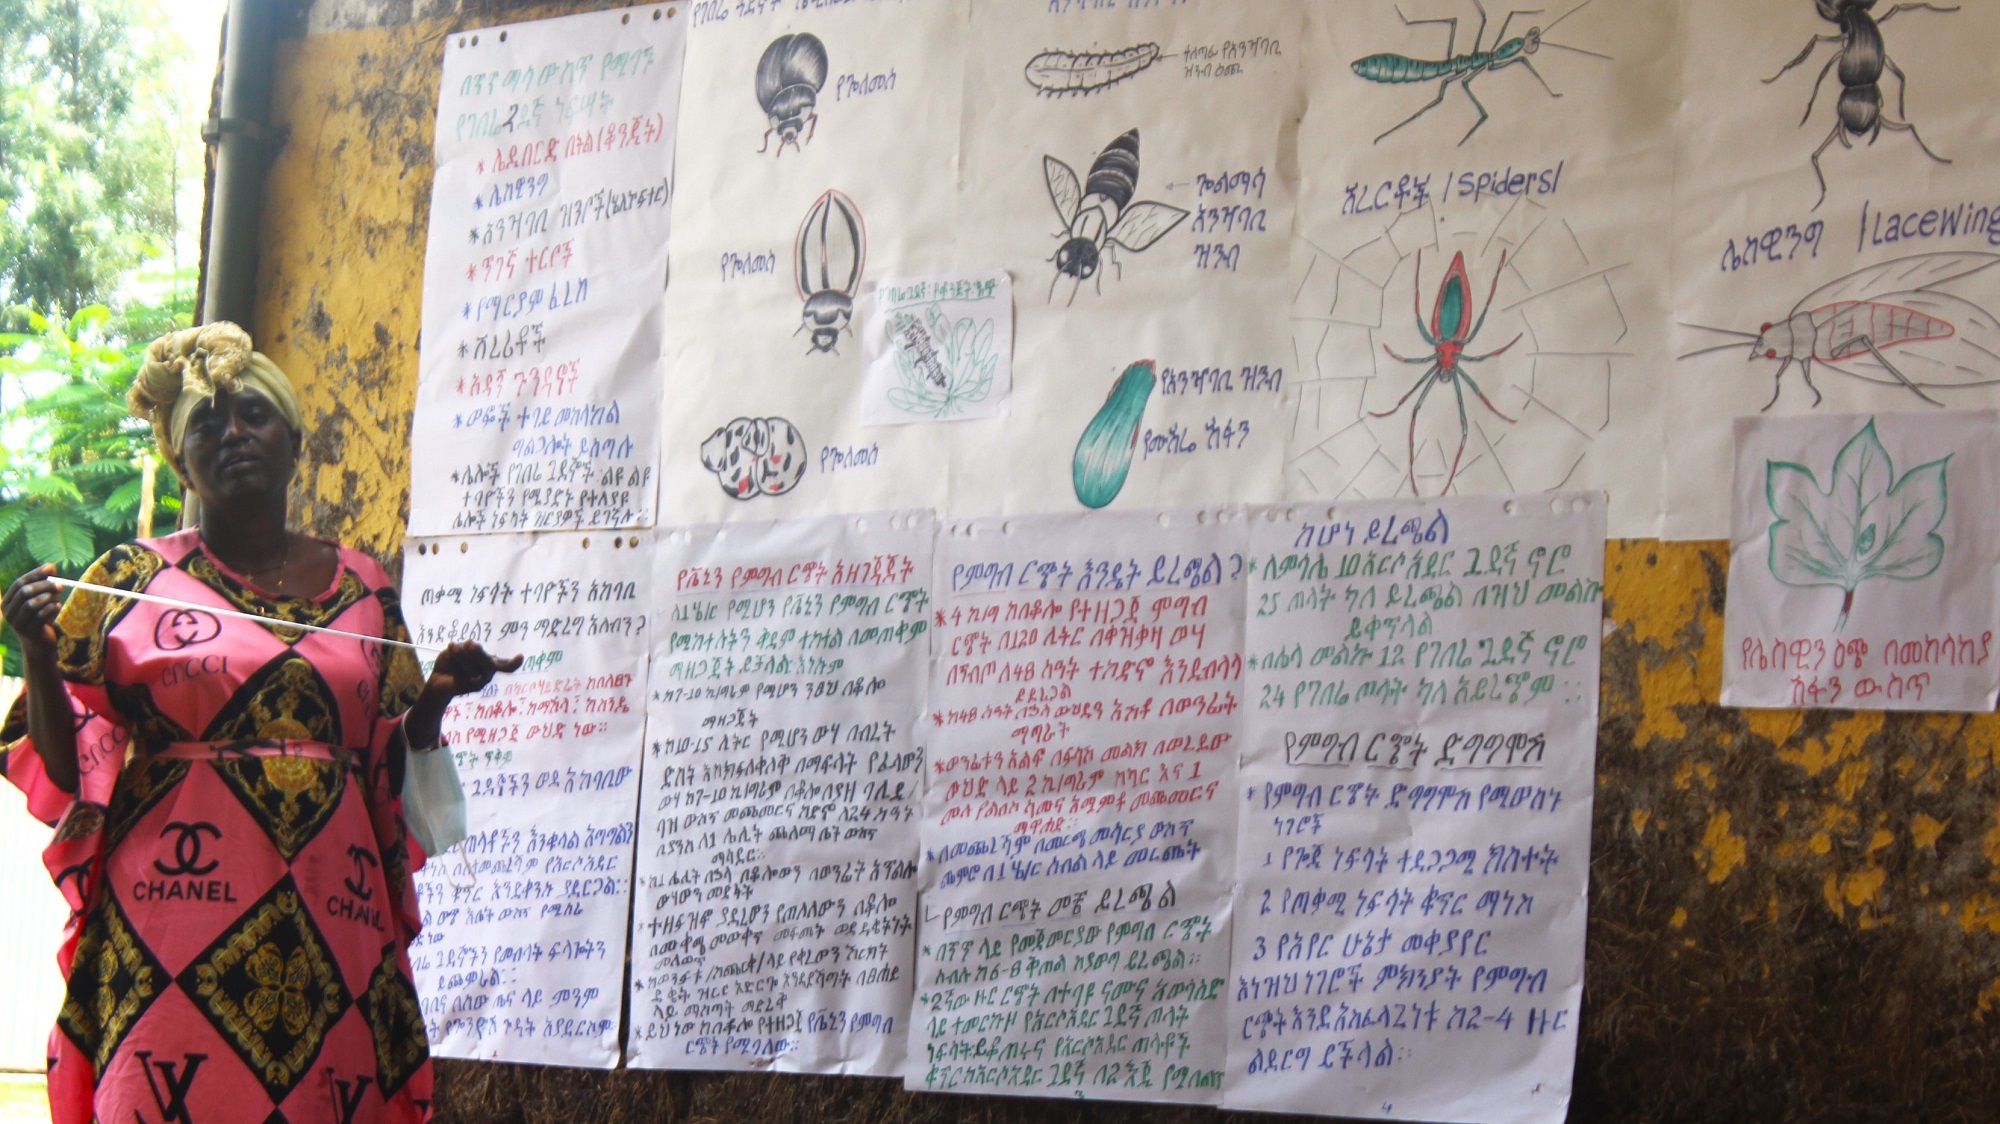 Farmer Field School - diagrams of insects